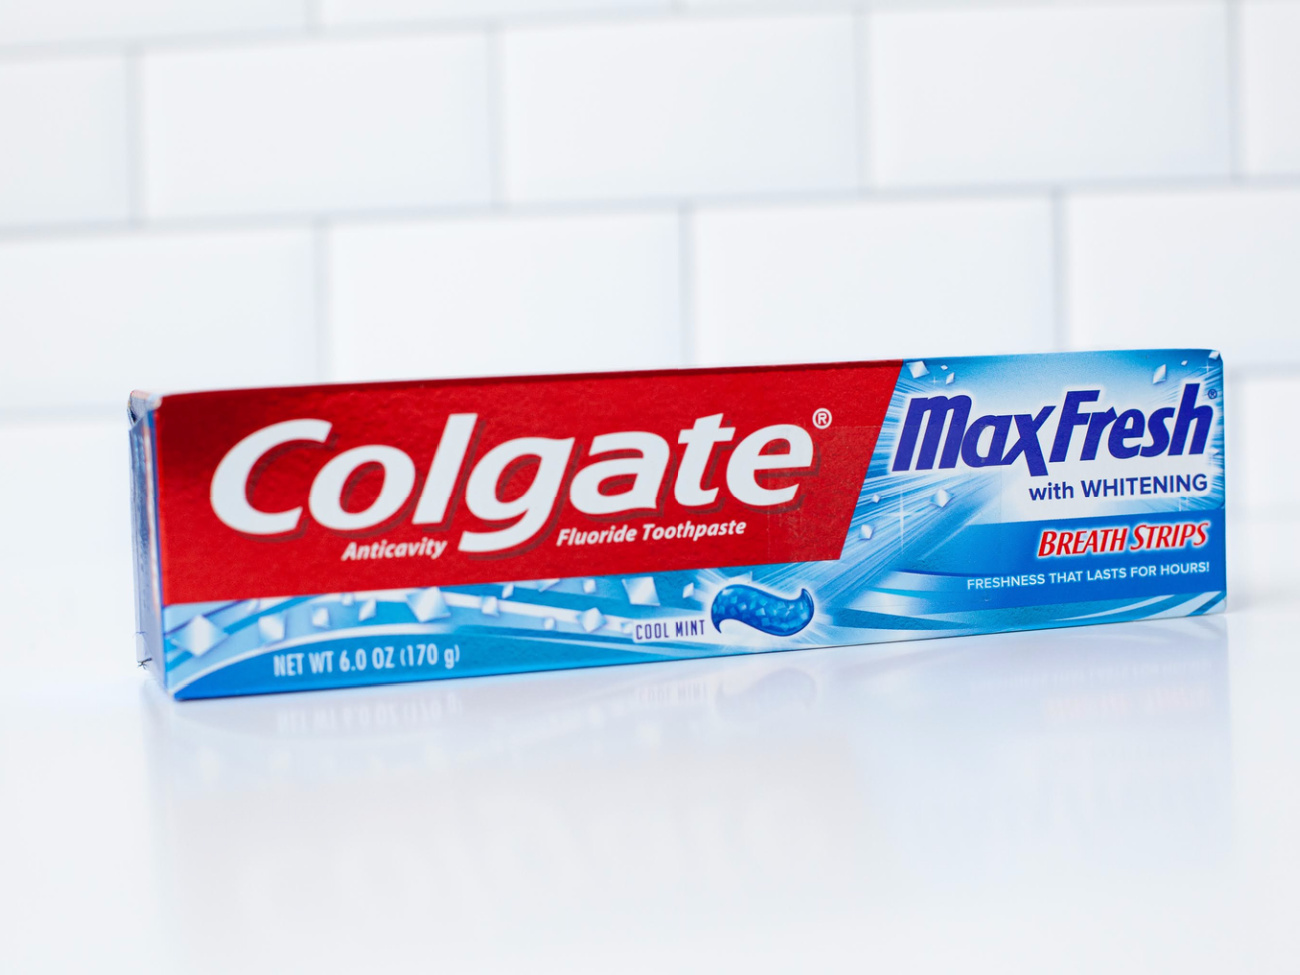 Get Colgate Get MaxFresh Toothpaste As Low As $1 At Publix – Ends Soon!